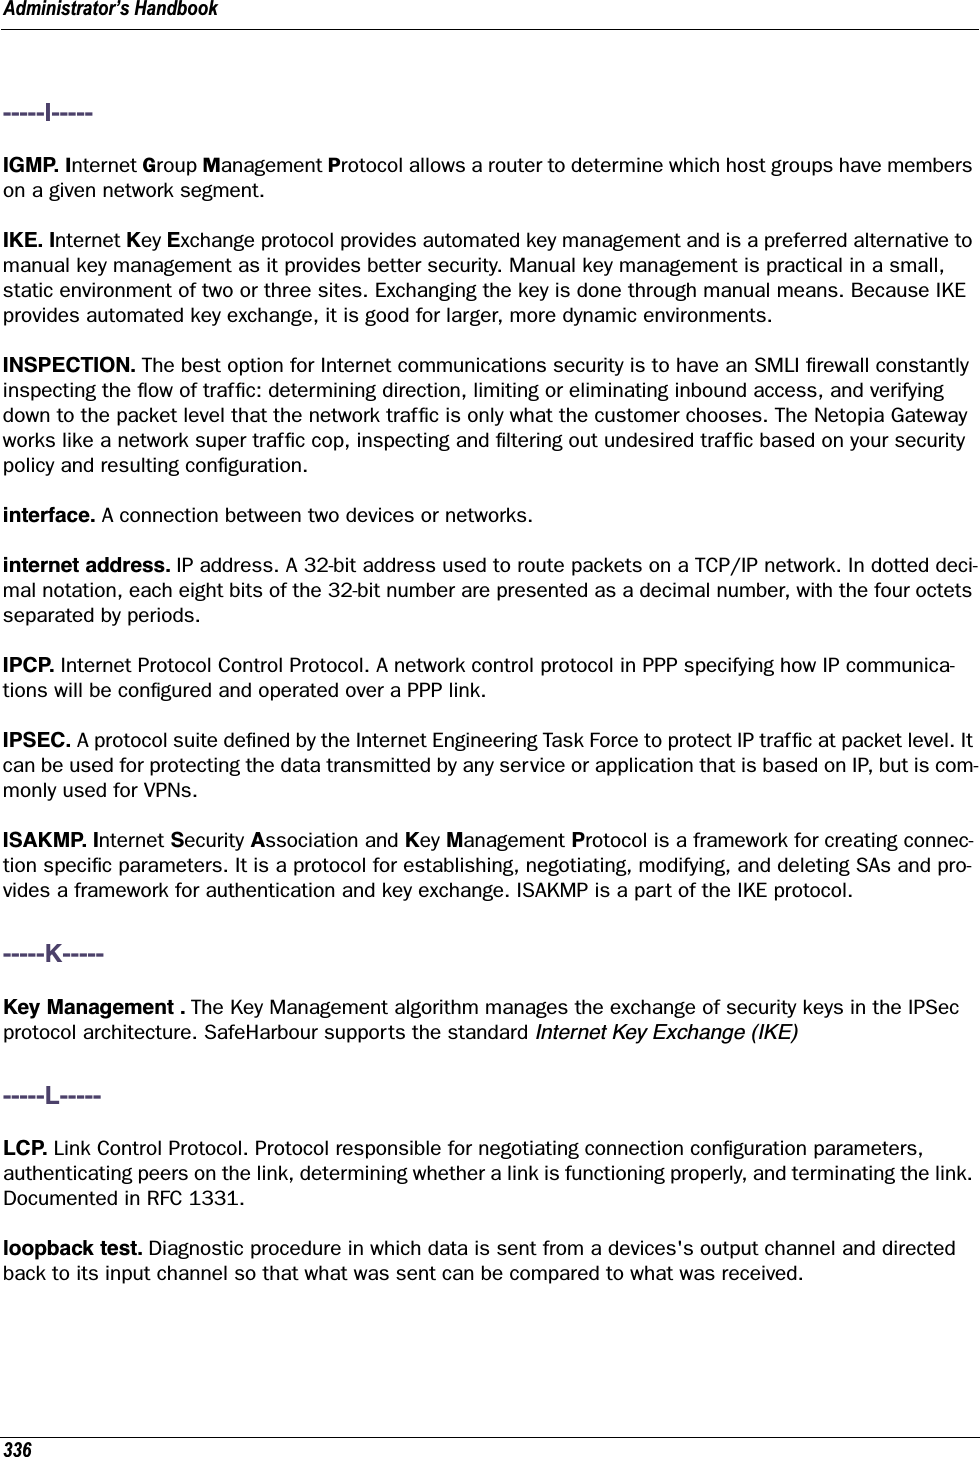 Administrator’s Handbook336-----I-----IGMP. Internet Group Management Protocol allows a router to determine which host groups have members on a given network segment.IKE. Internet Key Exchange protocol provides automated key management and is a preferred alternative to manual key management as it provides better security. Manual key management is practical in a small, static environment of two or three sites. Exchanging the key is done through manual means. Because IKE provides automated key exchange, it is good for larger, more dynamic environments. INSPECTION. The best option for Internet communications security is to have an SMLI ﬁrewall constantly inspecting the ﬂow of trafﬁc: determining direction, limiting or eliminating inbound access, and verifying down to the packet level that the network trafﬁc is only what the customer chooses. The Netopia Gateway works like a network super trafﬁc cop, inspecting and ﬁltering out undesired trafﬁc based on your security policy and resulting conﬁguration.interface. A connection between two devices or networks.internet address. IP address. A 32-bit address used to route packets on a TCP/IP network. In dotted deci-mal notation, each eight bits of the 32-bit number are presented as a decimal number, with the four octets separated by periods. IPCP. Internet Protocol Control Protocol. A network control protocol in PPP specifying how IP communica-tions will be conﬁgured and operated over a PPP link. IPSEC. A protocol suite deﬁned by the Internet Engineering Task Force to protect IP trafﬁc at packet level. It can be used for protecting the data transmitted by any service or application that is based on IP, but is com-monly used for VPNs.ISAKMP. Internet Security Association and Key Management Protocol is a framework for creating connec-tion speciﬁc parameters. It is a protocol for establishing, negotiating, modifying, and deleting SAs and pro-vides a framework for authentication and key exchange. ISAKMP is a part of the IKE protocol.-----K-----Key Management . The Key Management algorithm manages the exchange of security keys in the IPSec protocol architecture. SafeHarbour supports the standard Internet Key Exchange (IKE)-----L-----LCP. Link Control Protocol. Protocol responsible for negotiating connection conﬁguration parameters, authenticating peers on the link, determining whether a link is functioning properly, and terminating the link. Documented in RFC 1331.loopback test. Diagnostic procedure in which data is sent from a devices&apos;s output channel and directed back to its input channel so that what was sent can be compared to what was received. 